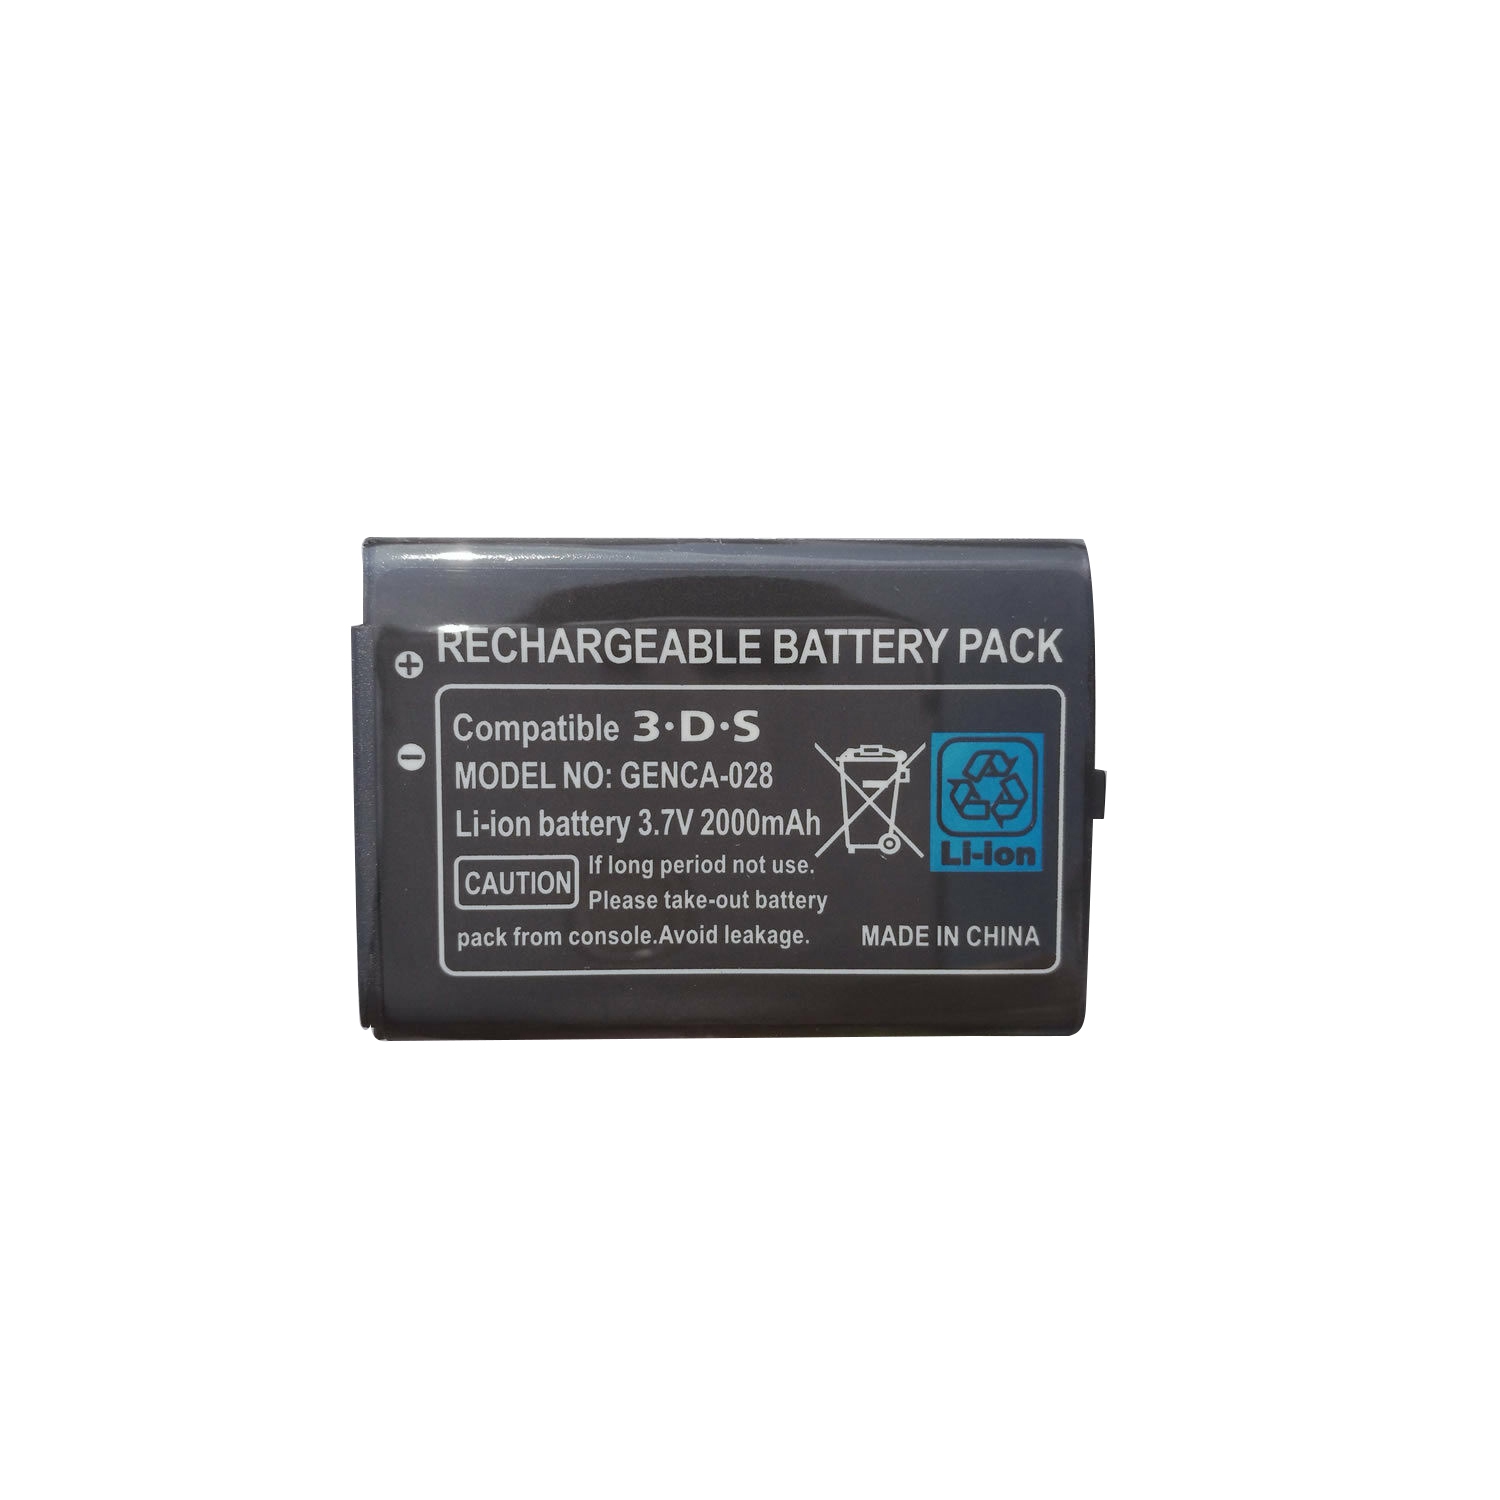 Rechargeable Battery Replacement 2000mAh 3.7V For Nintendo 3DS CTR-003 CTR-001